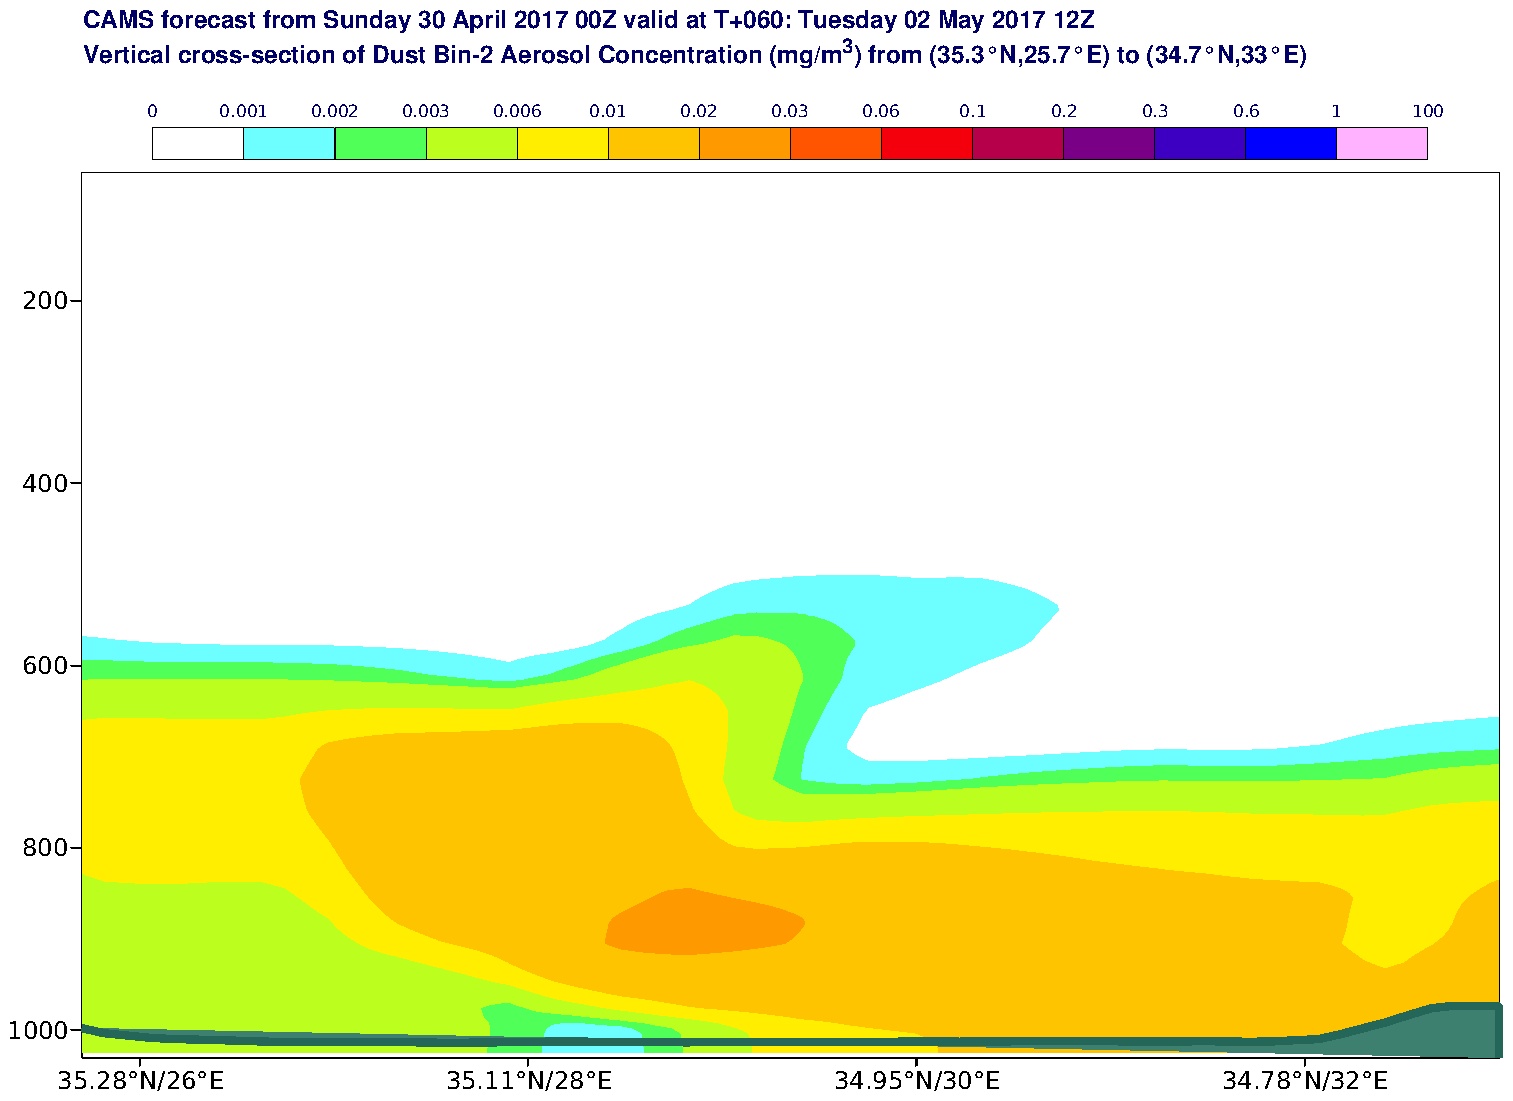 Vertical cross-section of Dust Bin-2 Aerosol Concentration (mg/m3) valid at T60 - 2017-05-02 12:00